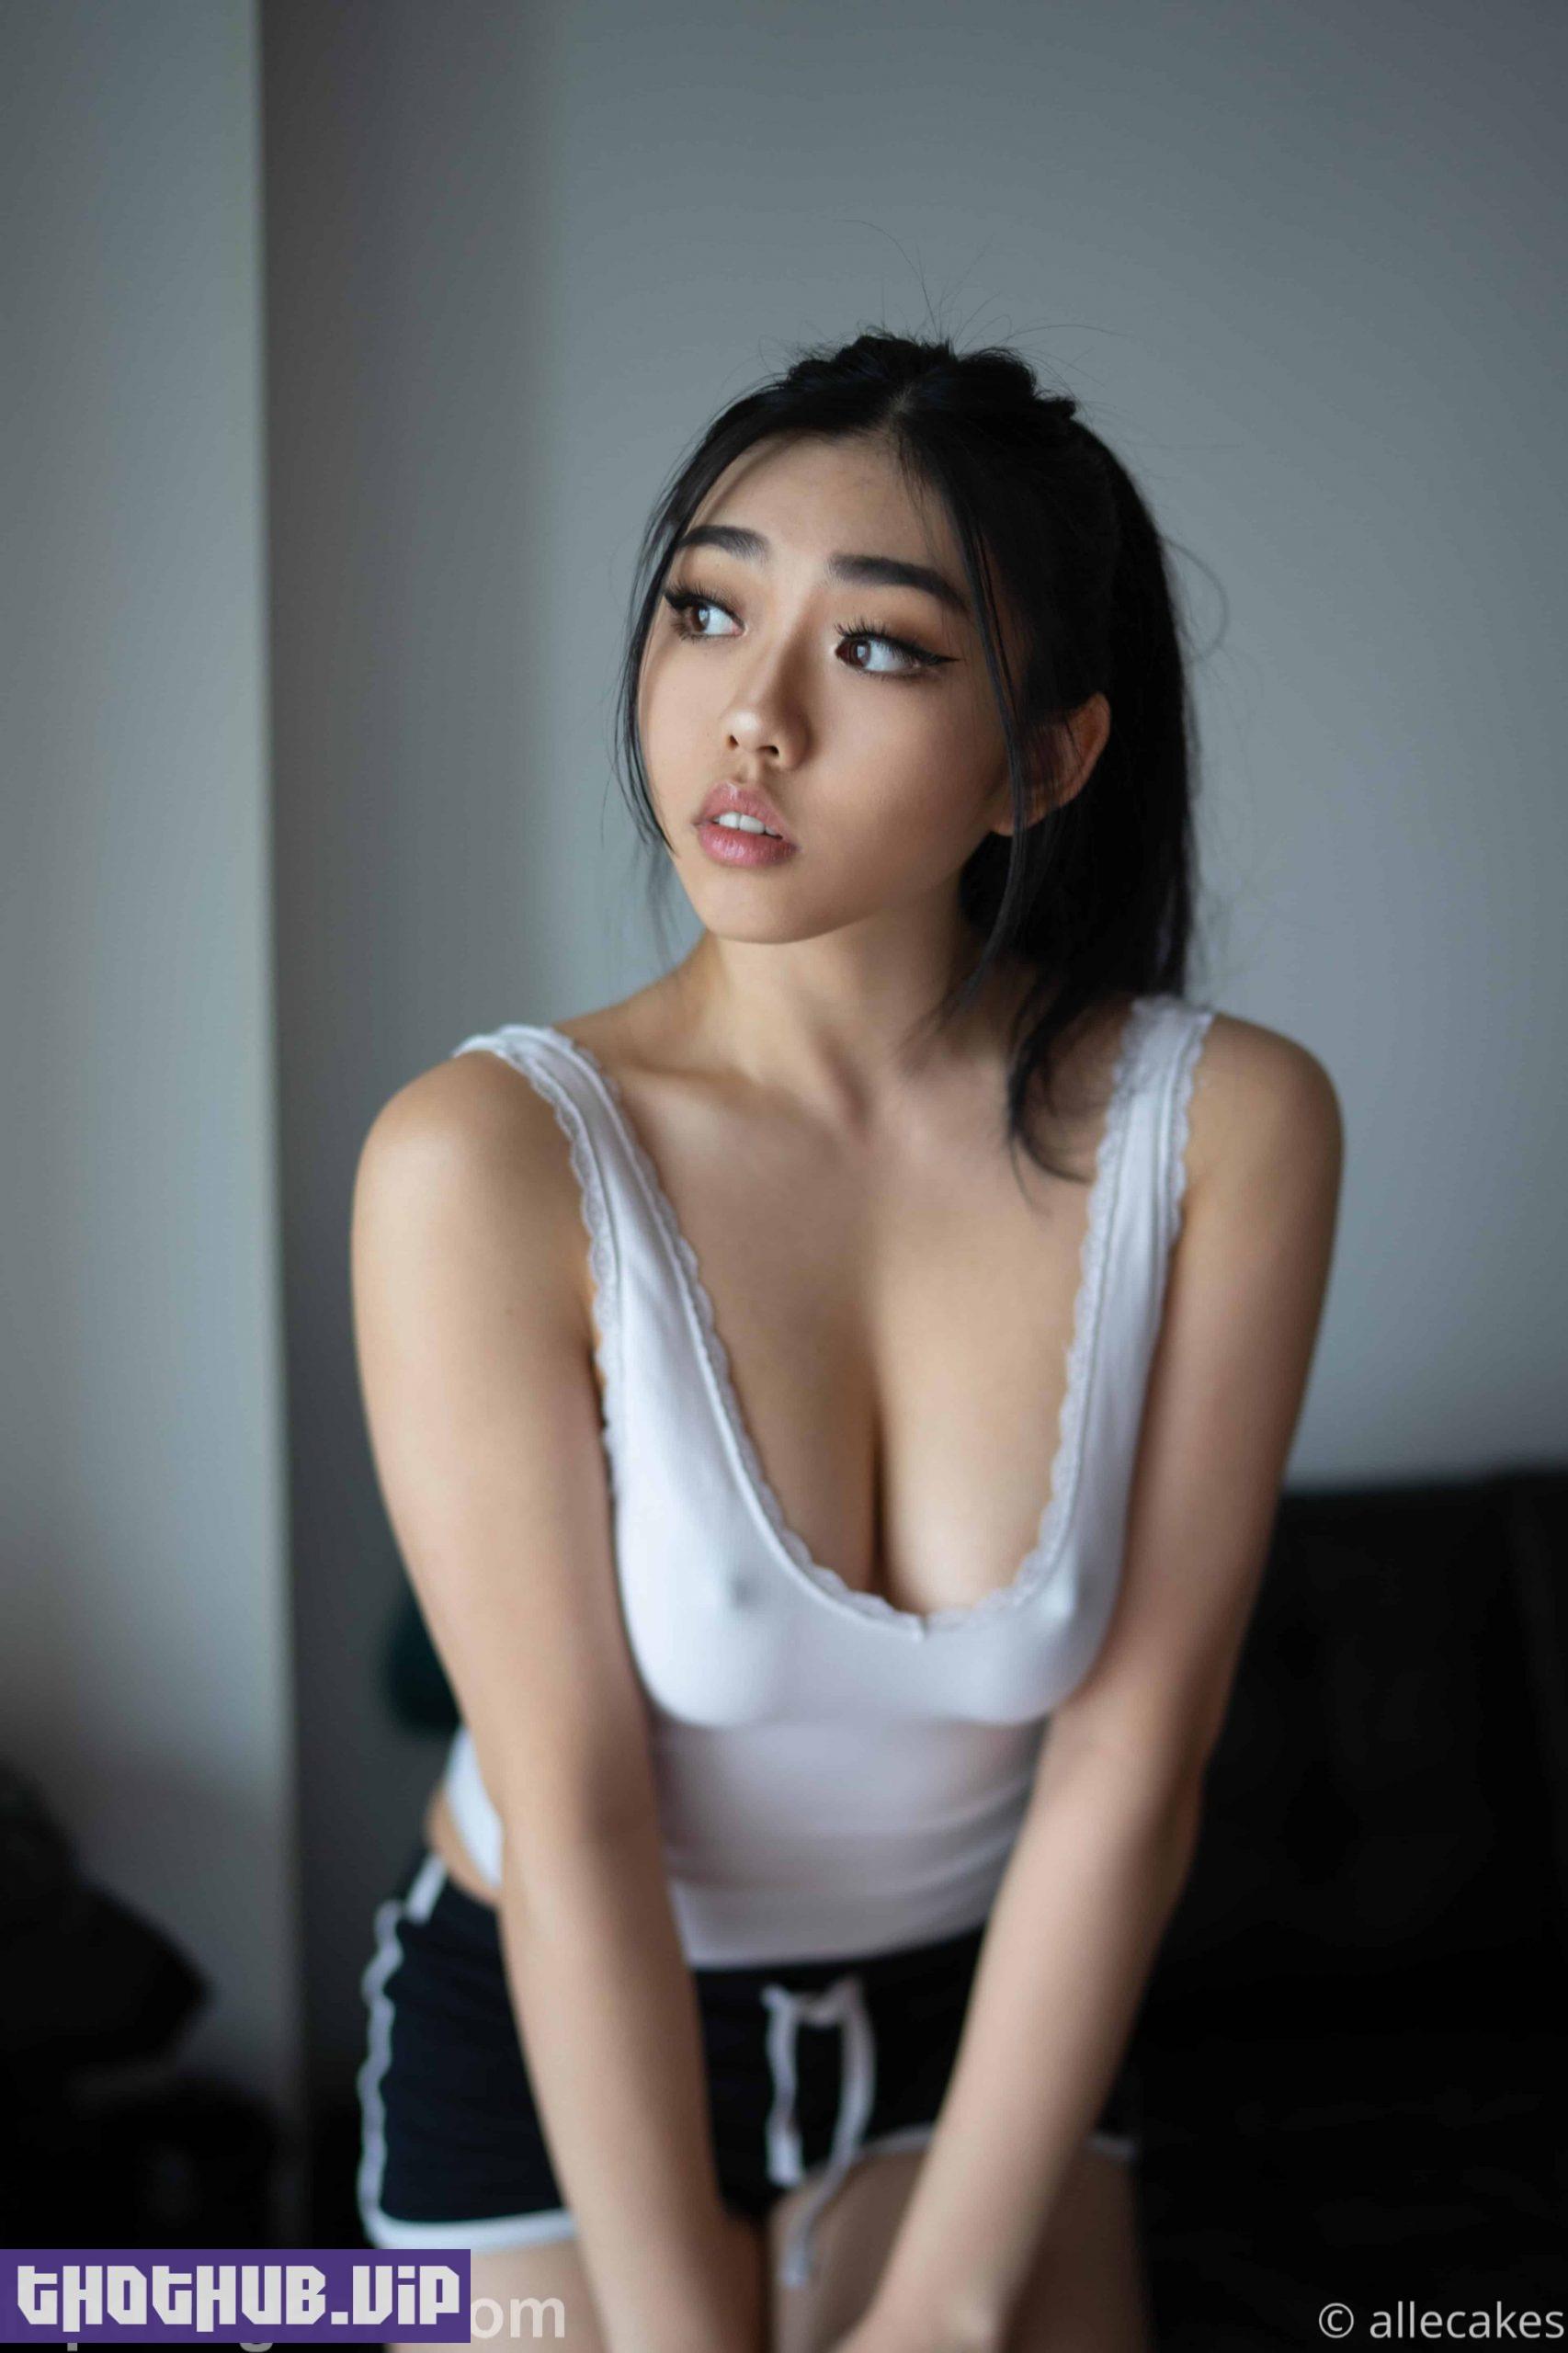 1660883926 391 Allecakes %E2%80%93 Cute Asian Onlyfans Nudes